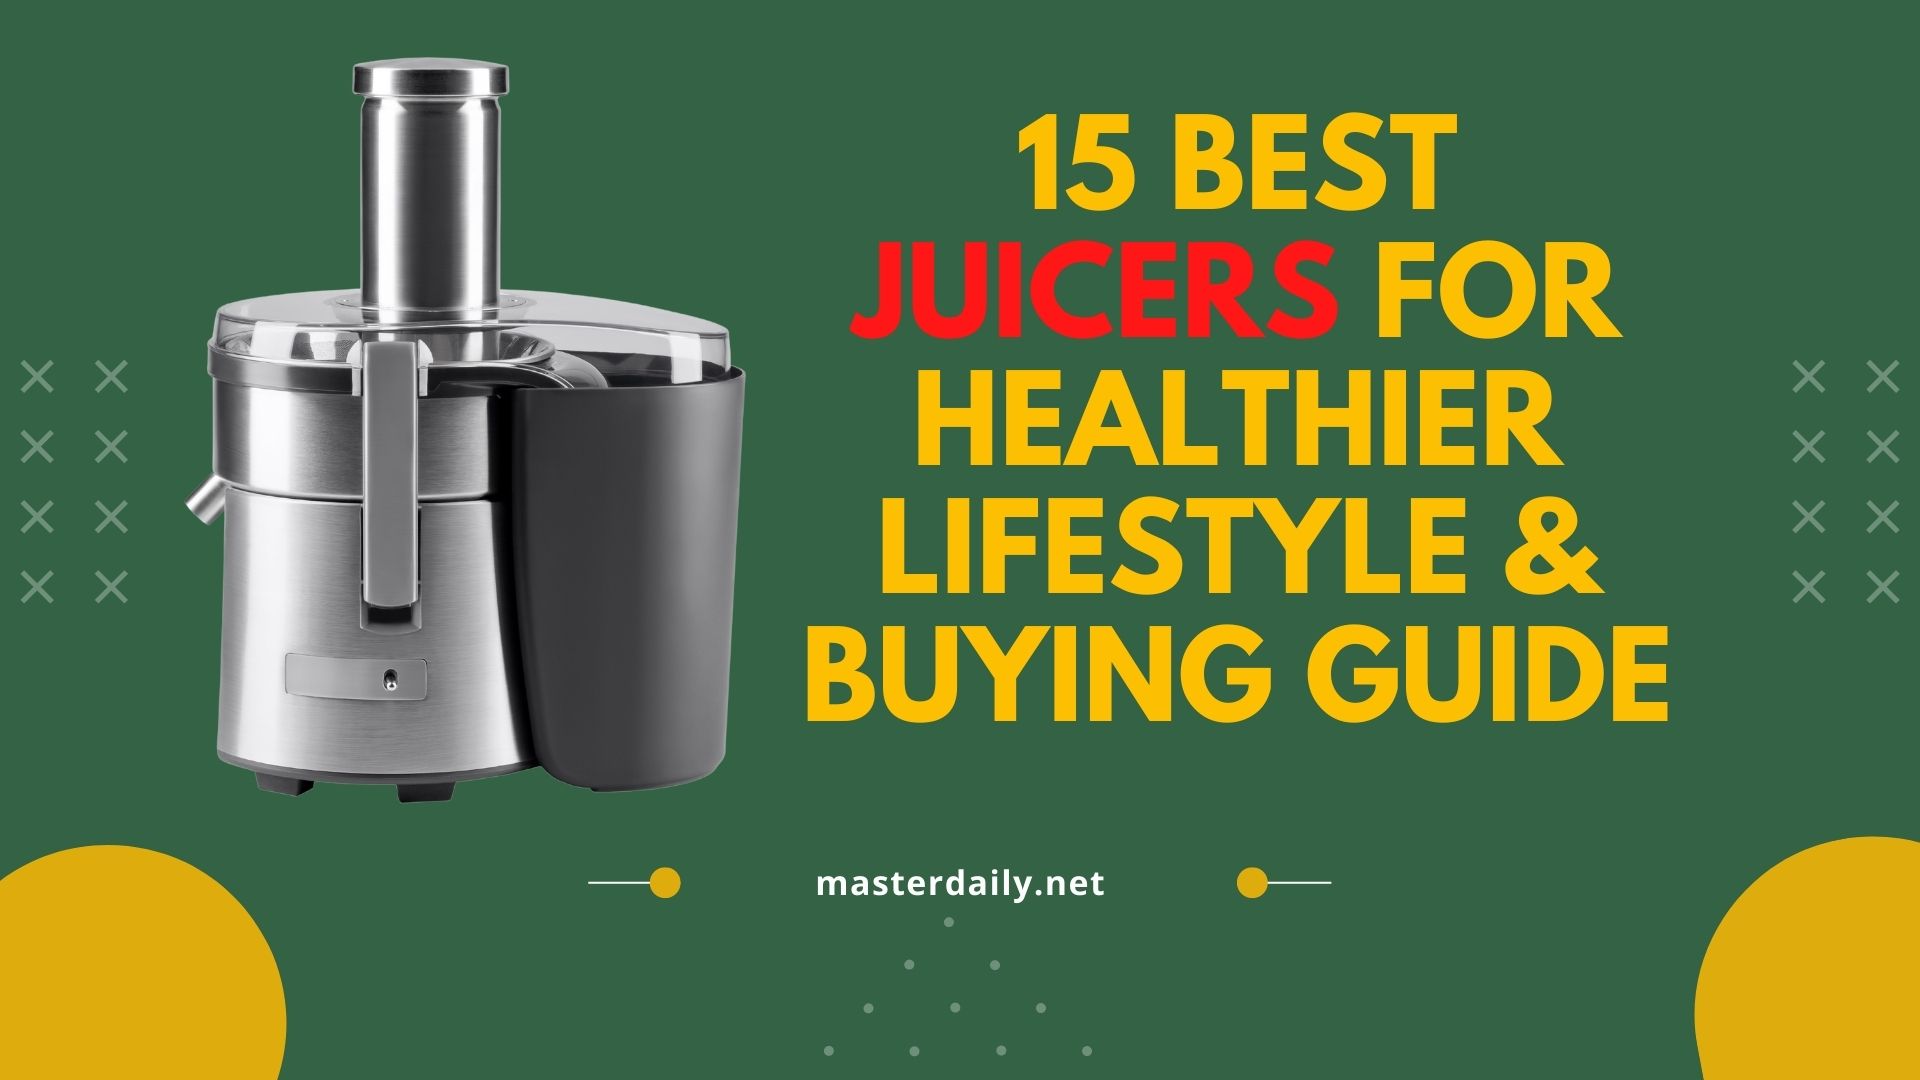 Best Juicers for Healthier Lifestyle & Buying Guide